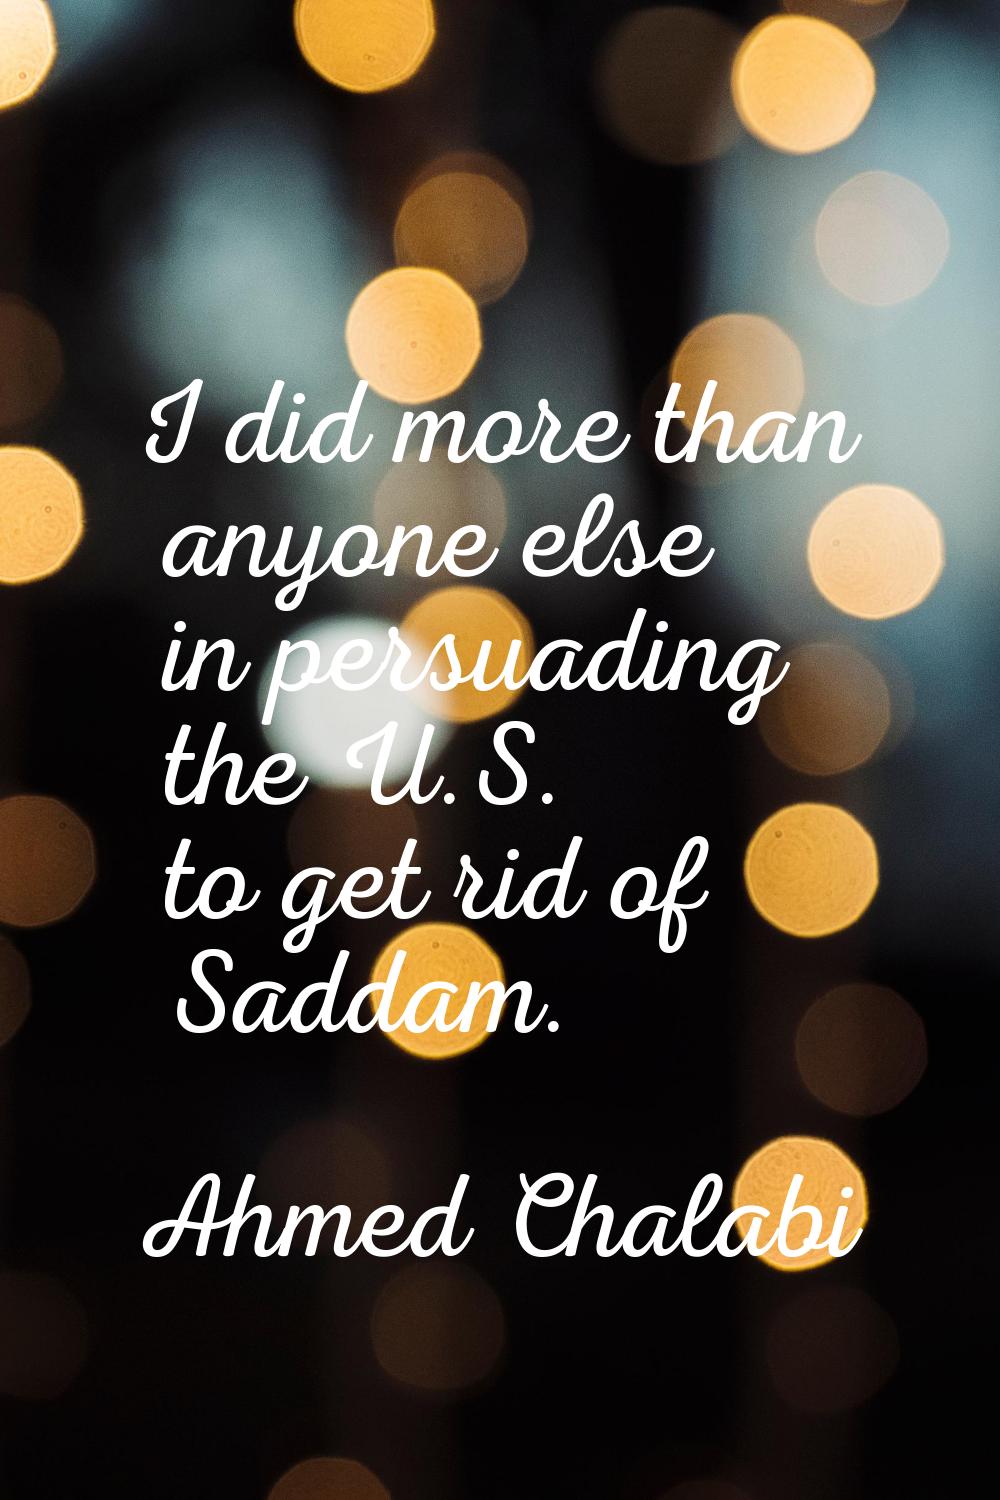 I did more than anyone else in persuading the U.S. to get rid of Saddam.